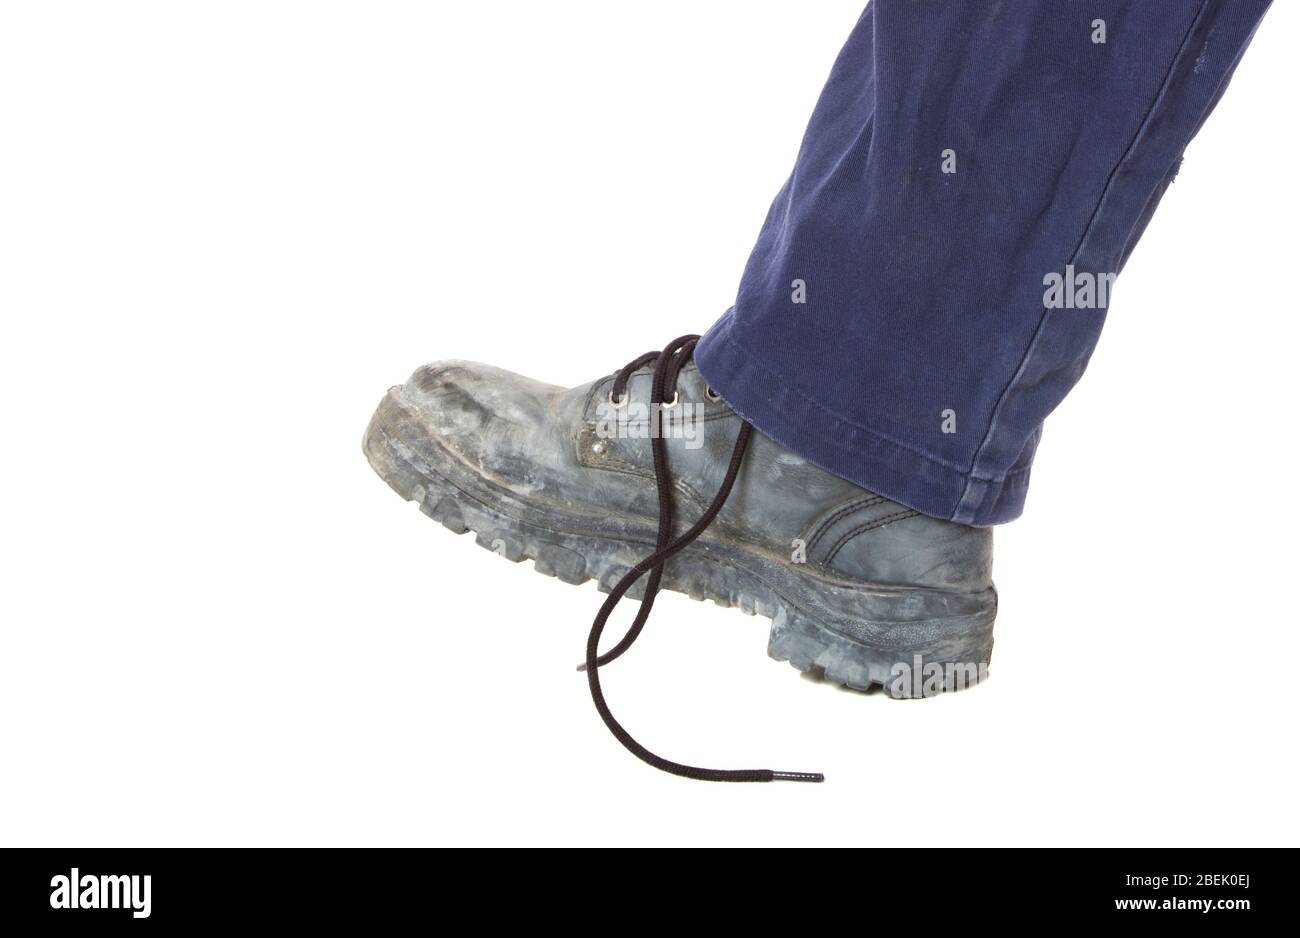 A tripping hazard with bootlace undone on white. Stock Photo